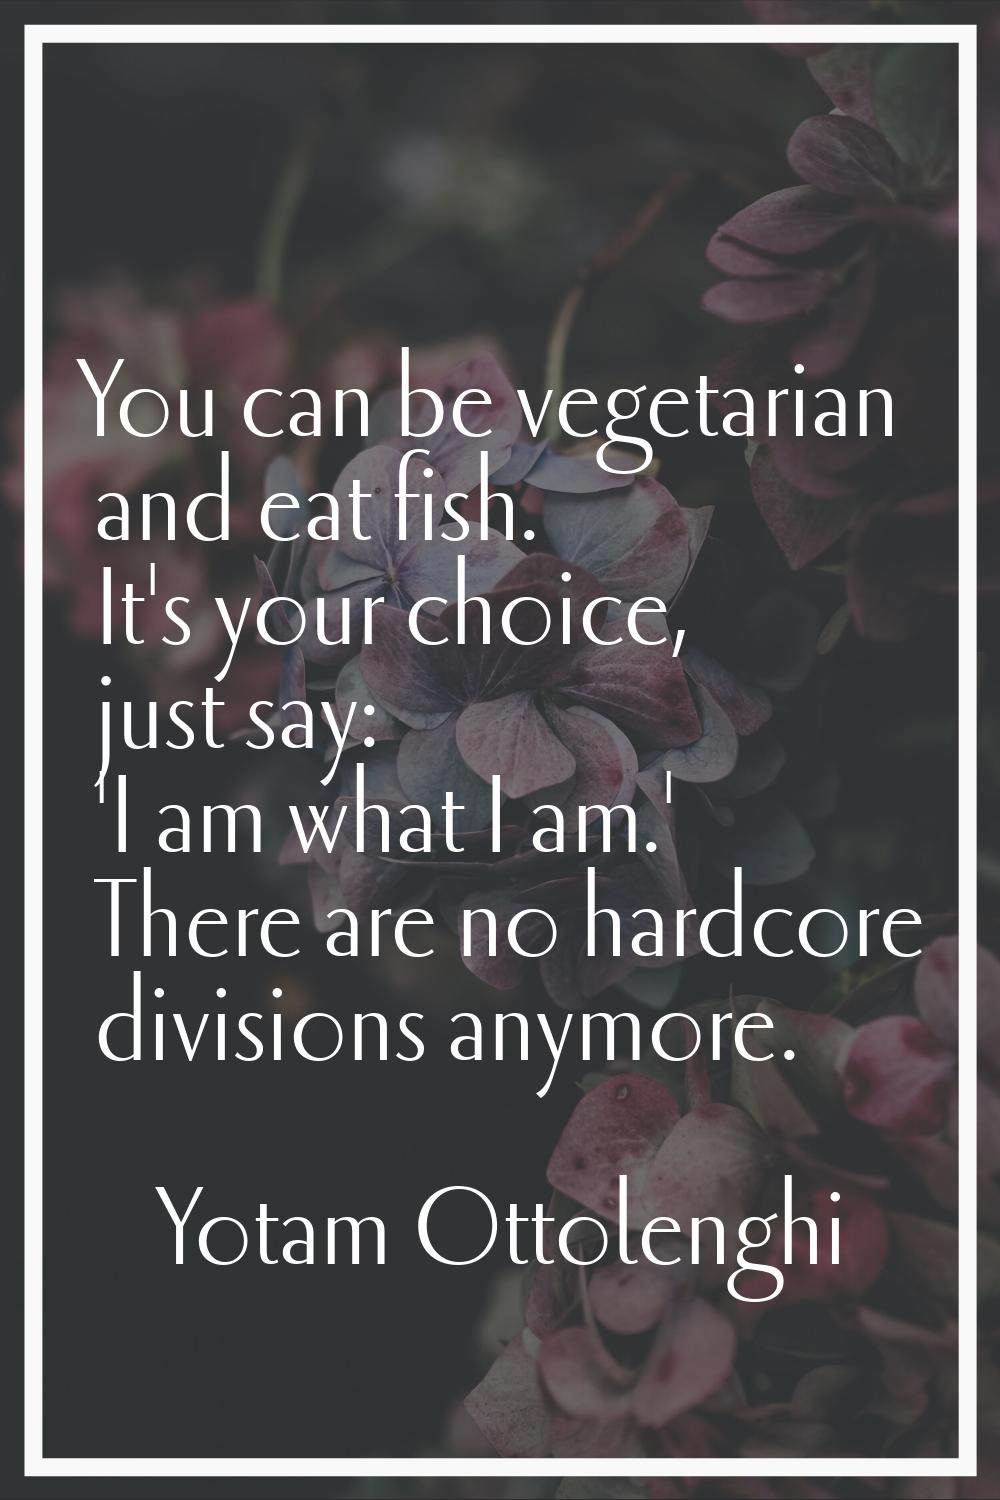 You can be vegetarian and eat fish. It's your choice, just say: 'I am what I am.' There are no hard